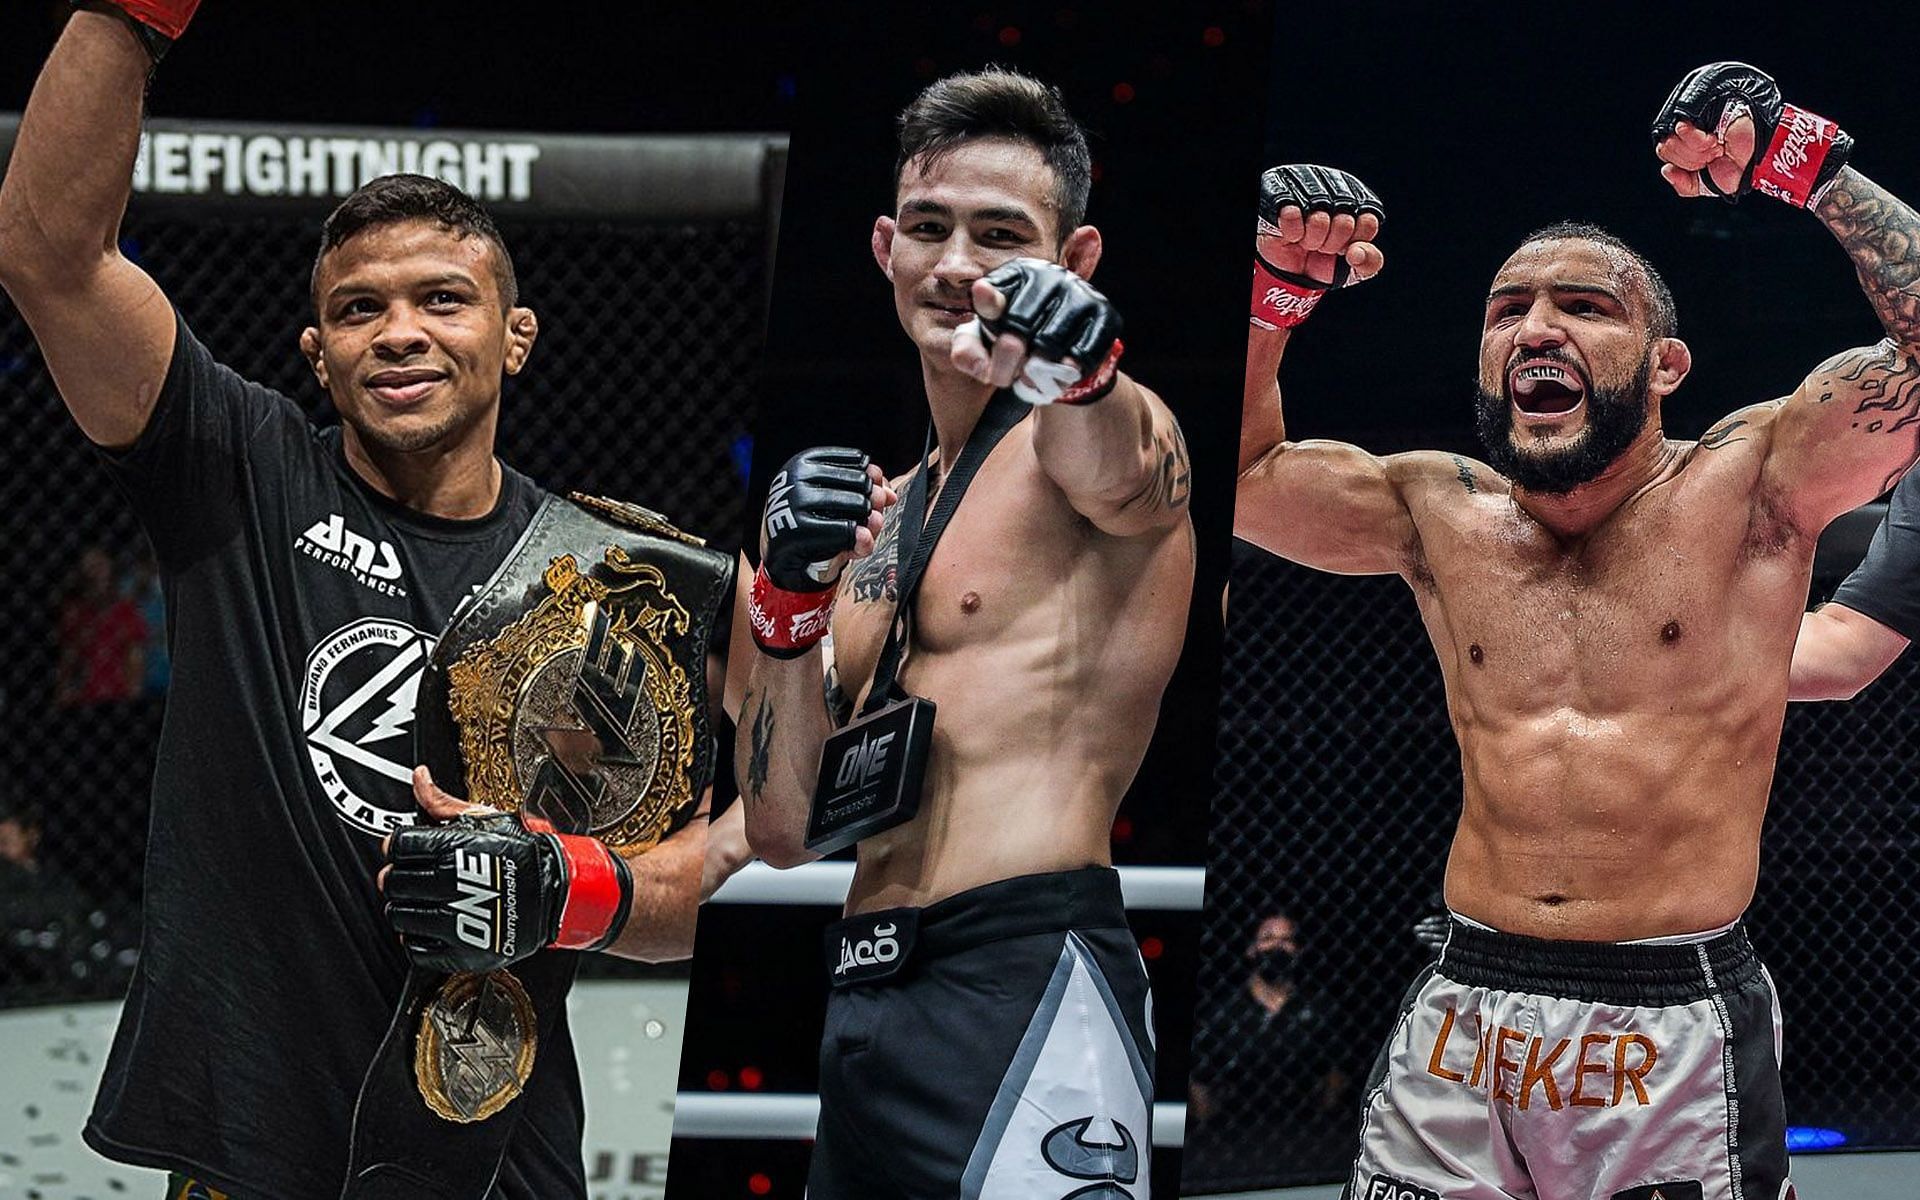 Thanh Le (Center) expects fireworks when Bibiano Fernandes (Left) and John Lineker (Right) collide. | [Photos: ONE Championship]